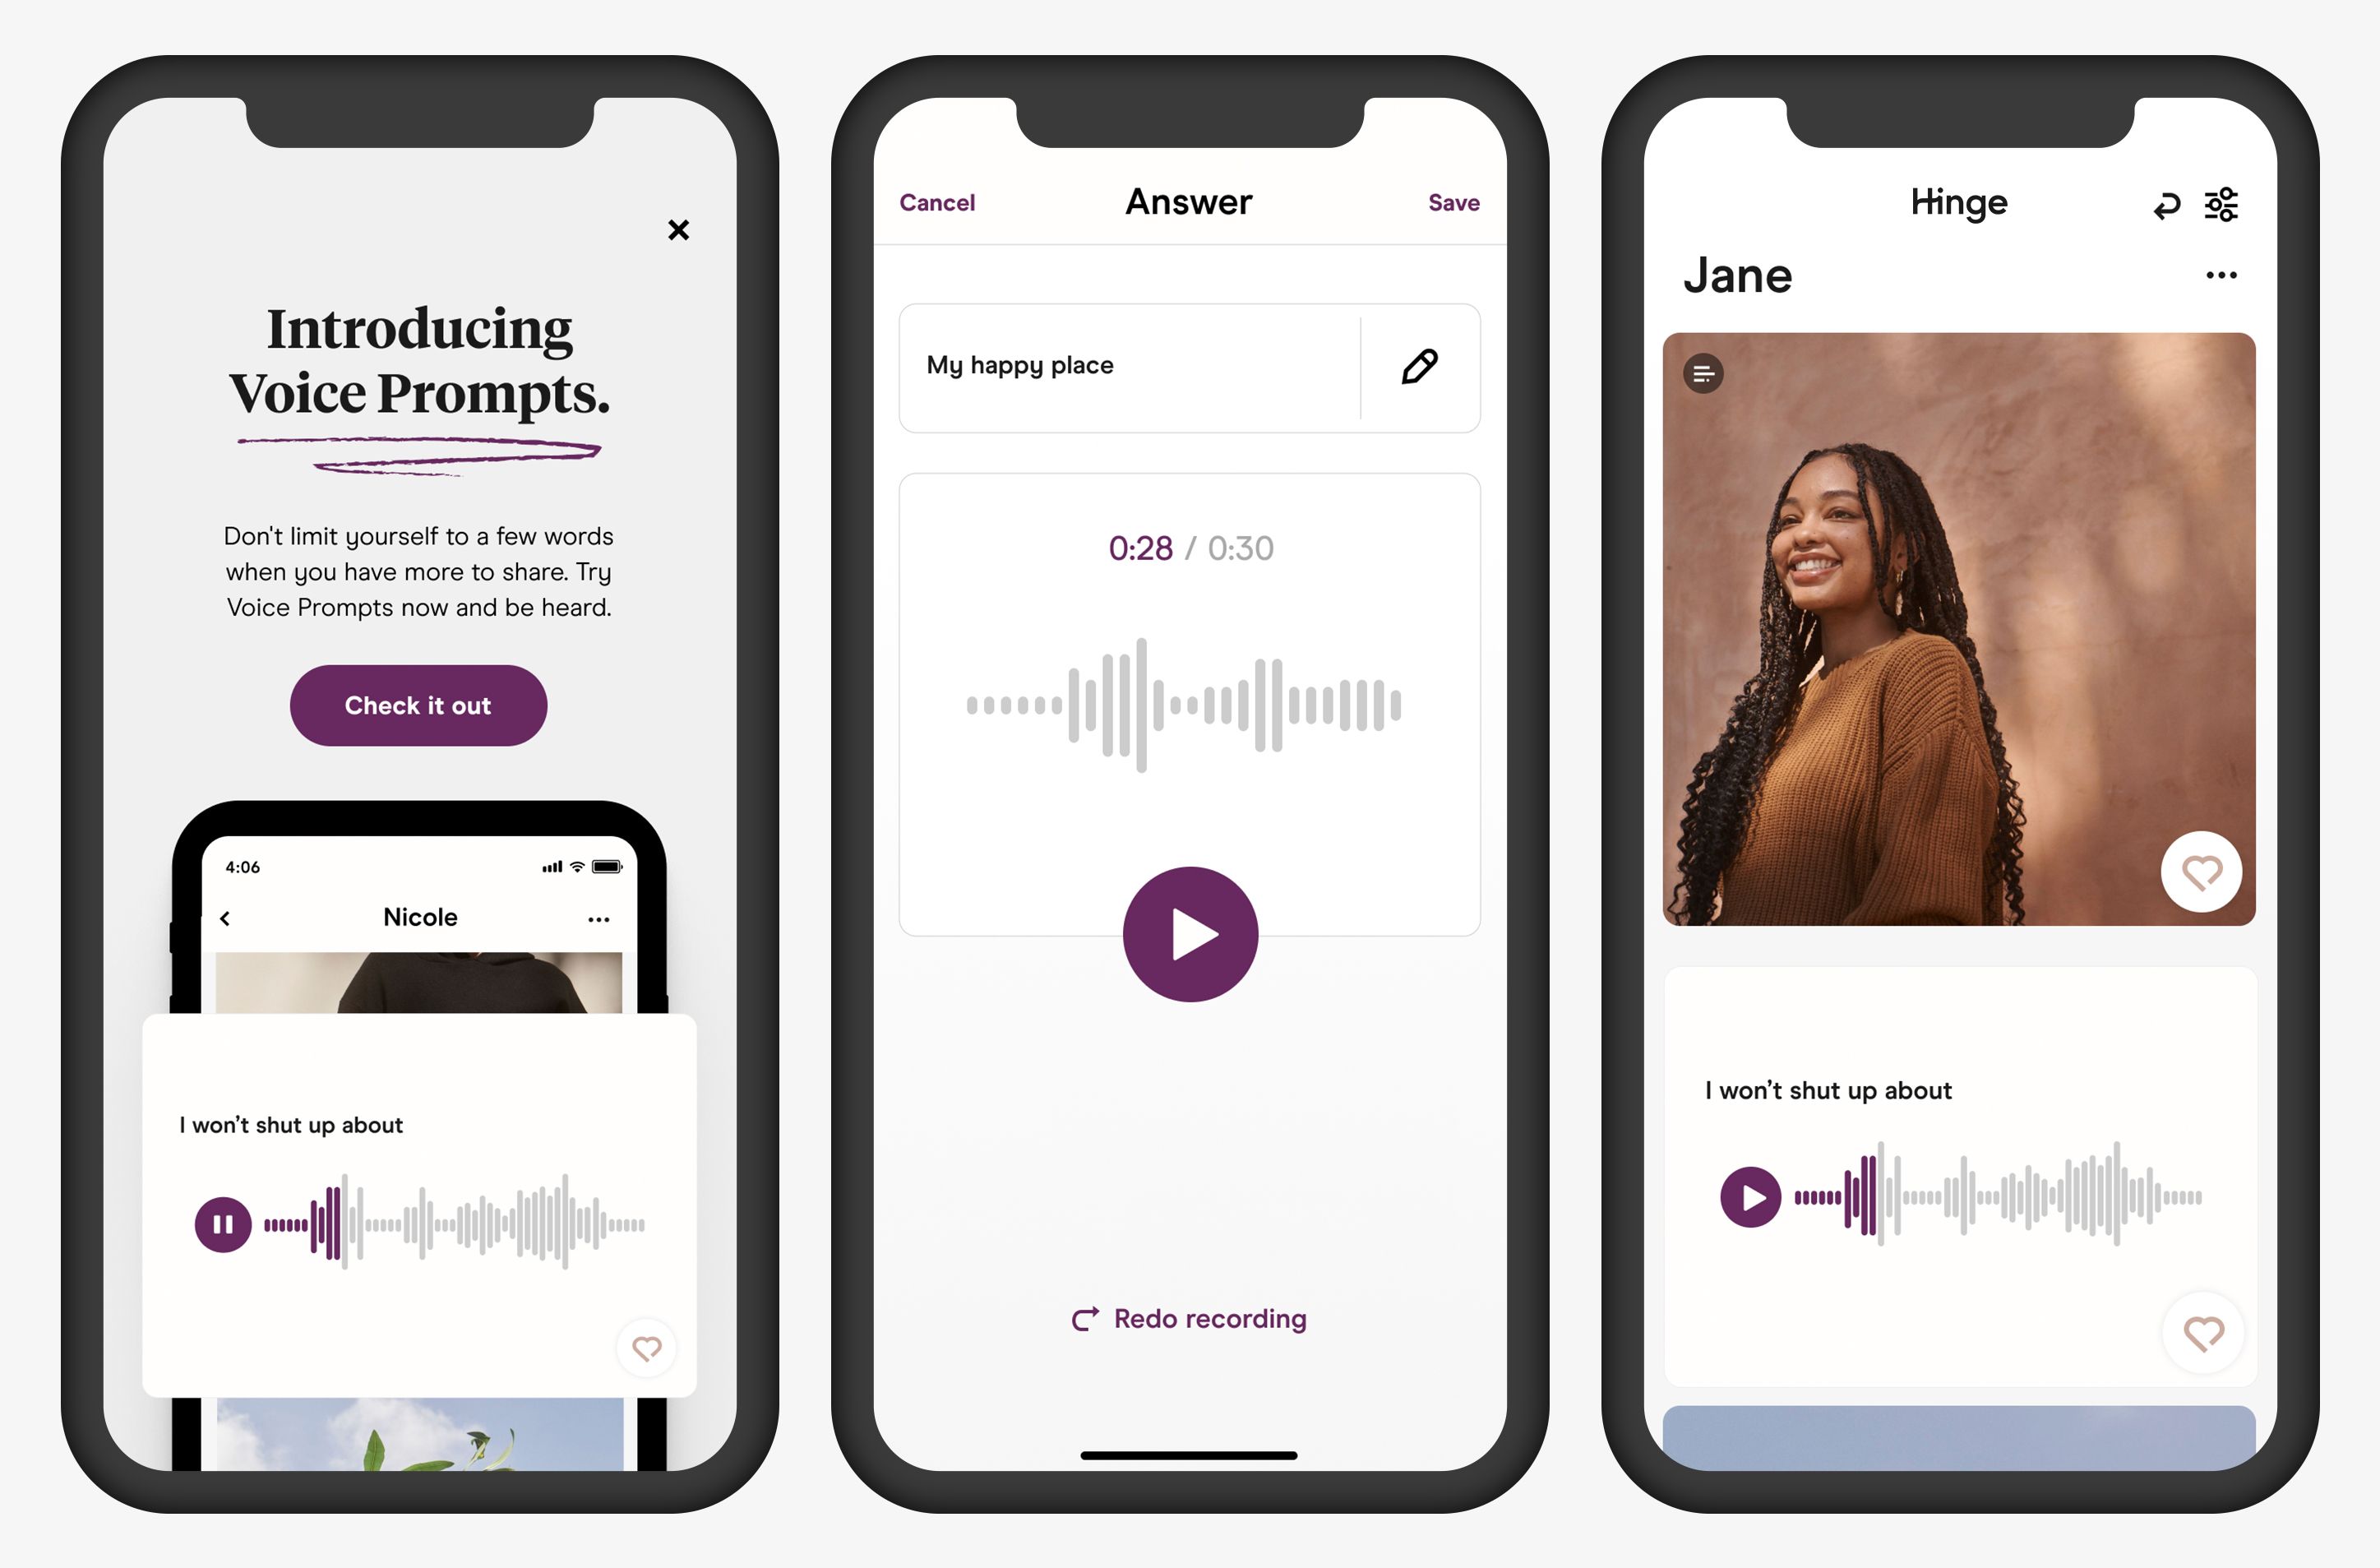 Hinge launches a new 'Voice Prompts' feature to give users a new way to  interact | TechCrunch